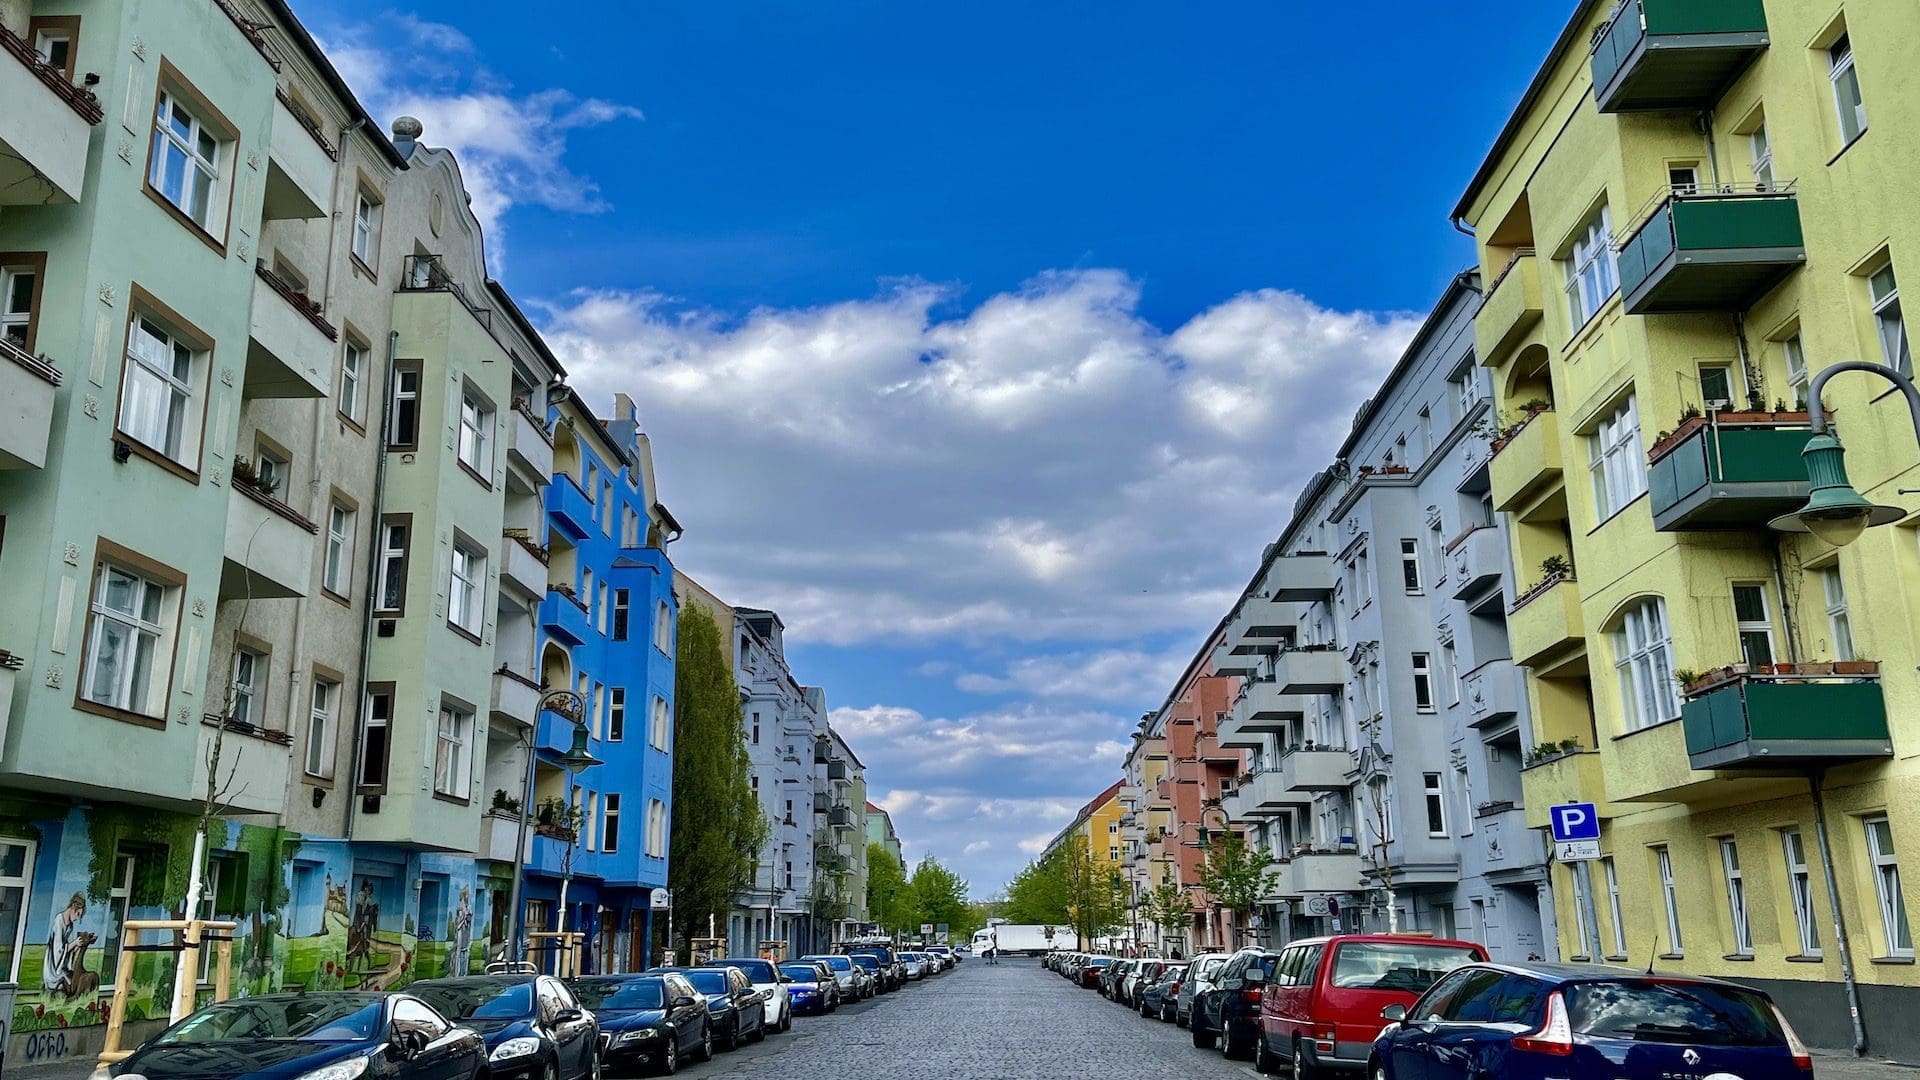 Discover the eclectic architecture and beautiful hidden streets of East Berlin Prenzlauer Berg on Walk With Us Tours street food tour